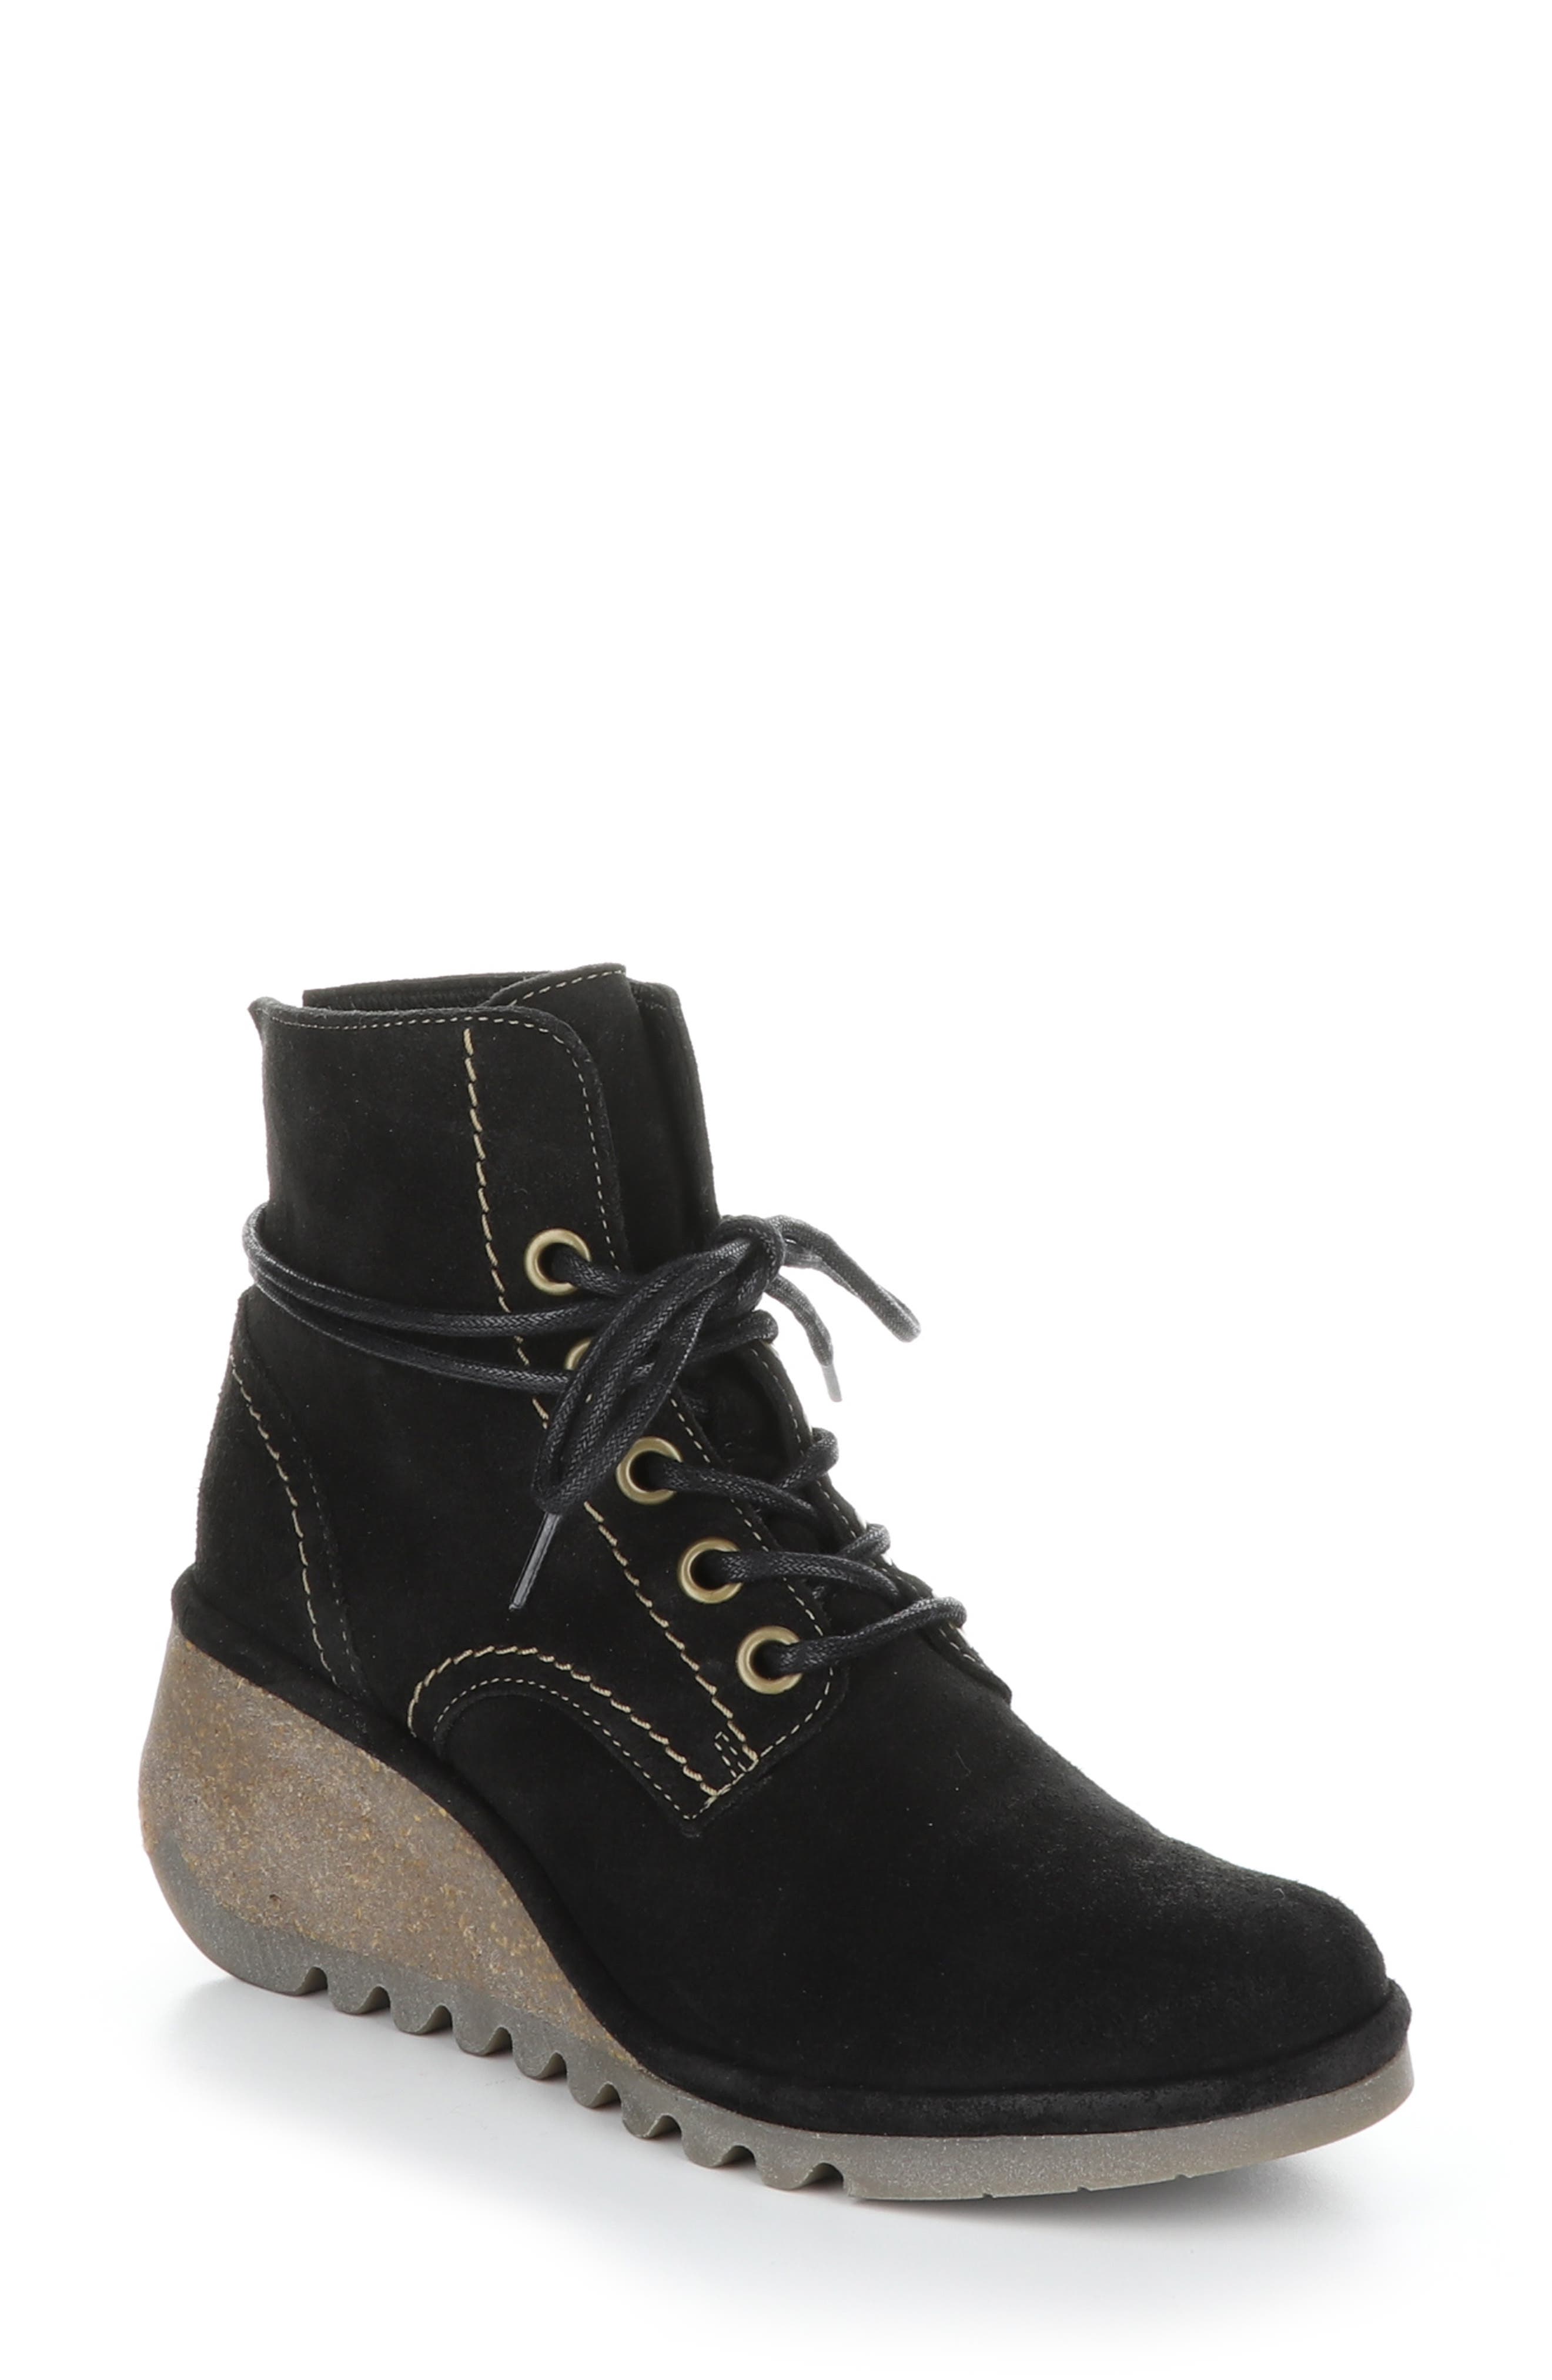 Womens Fly London Dalo Buckle Boots Sludge Suede Boots 